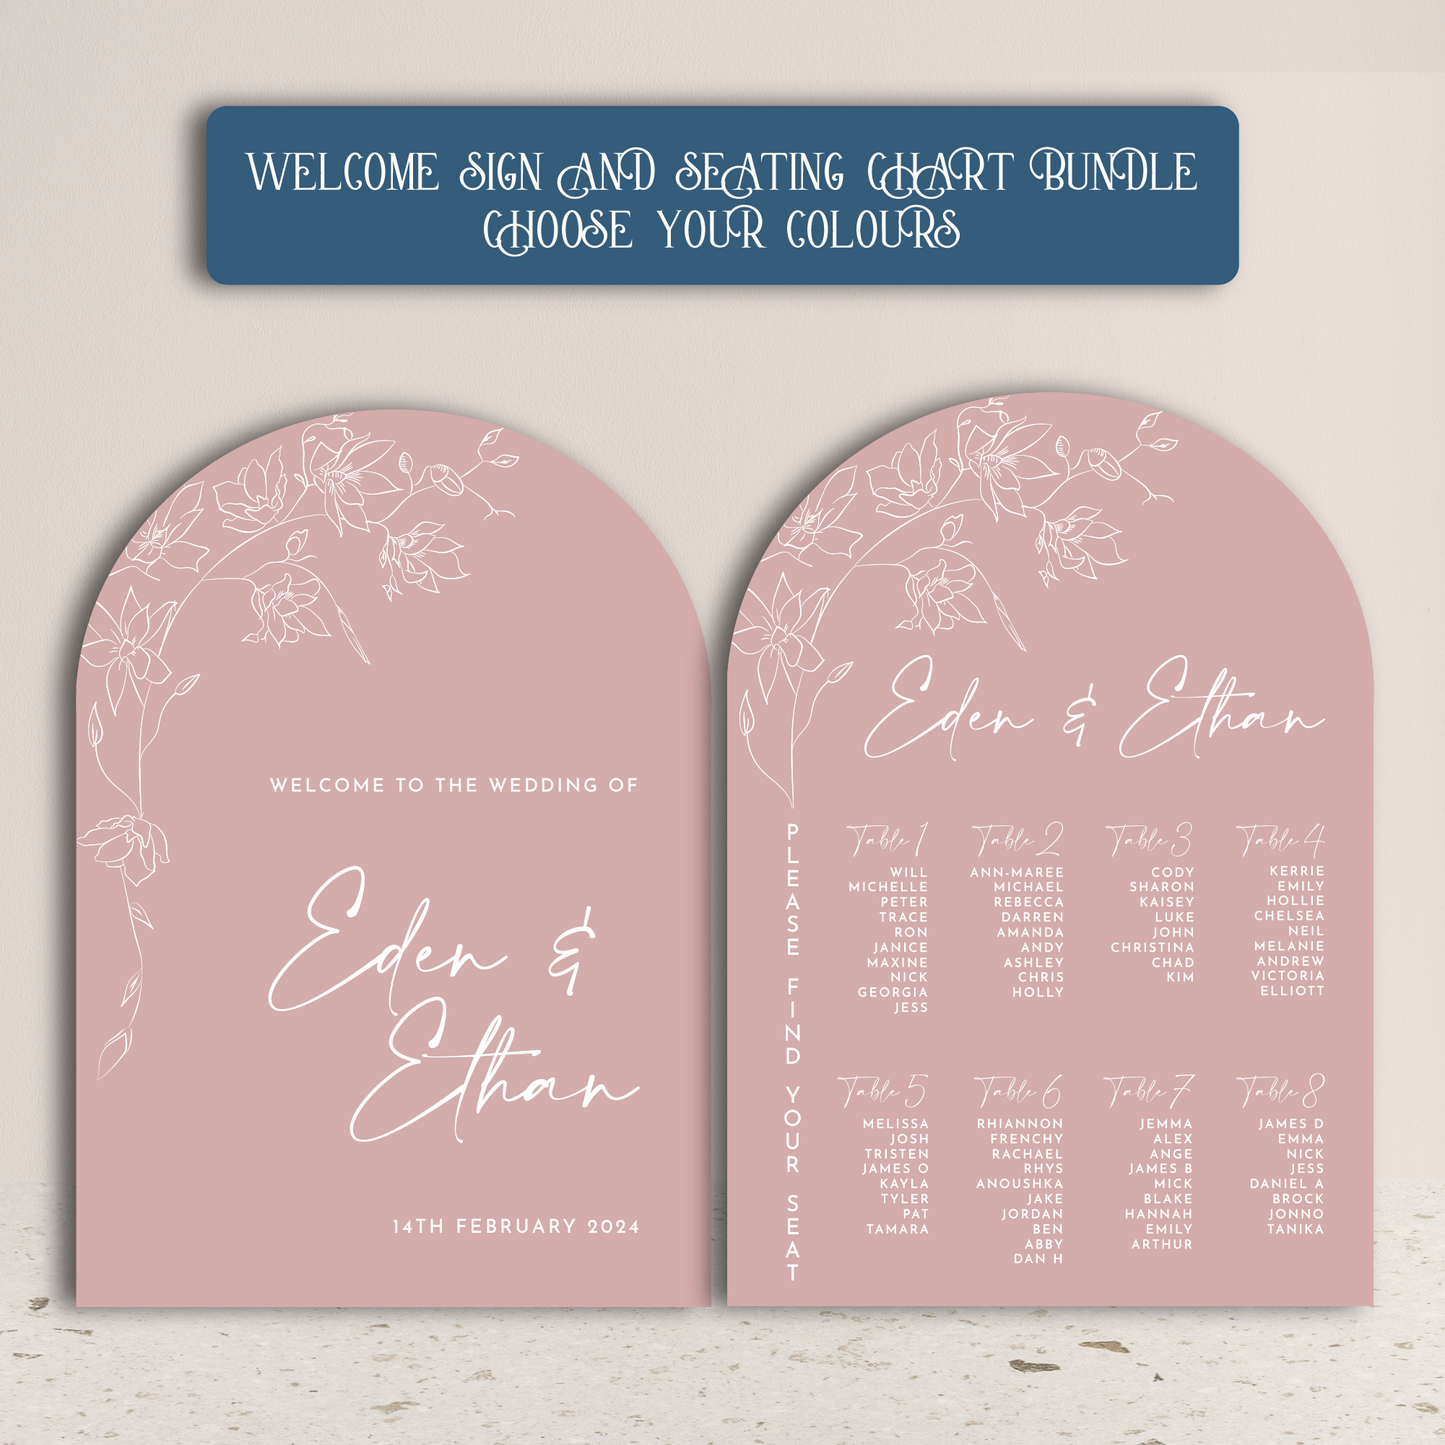 Eden Arch Wedding Welcome Sign and Seating Chart Package - Glitzy Prints